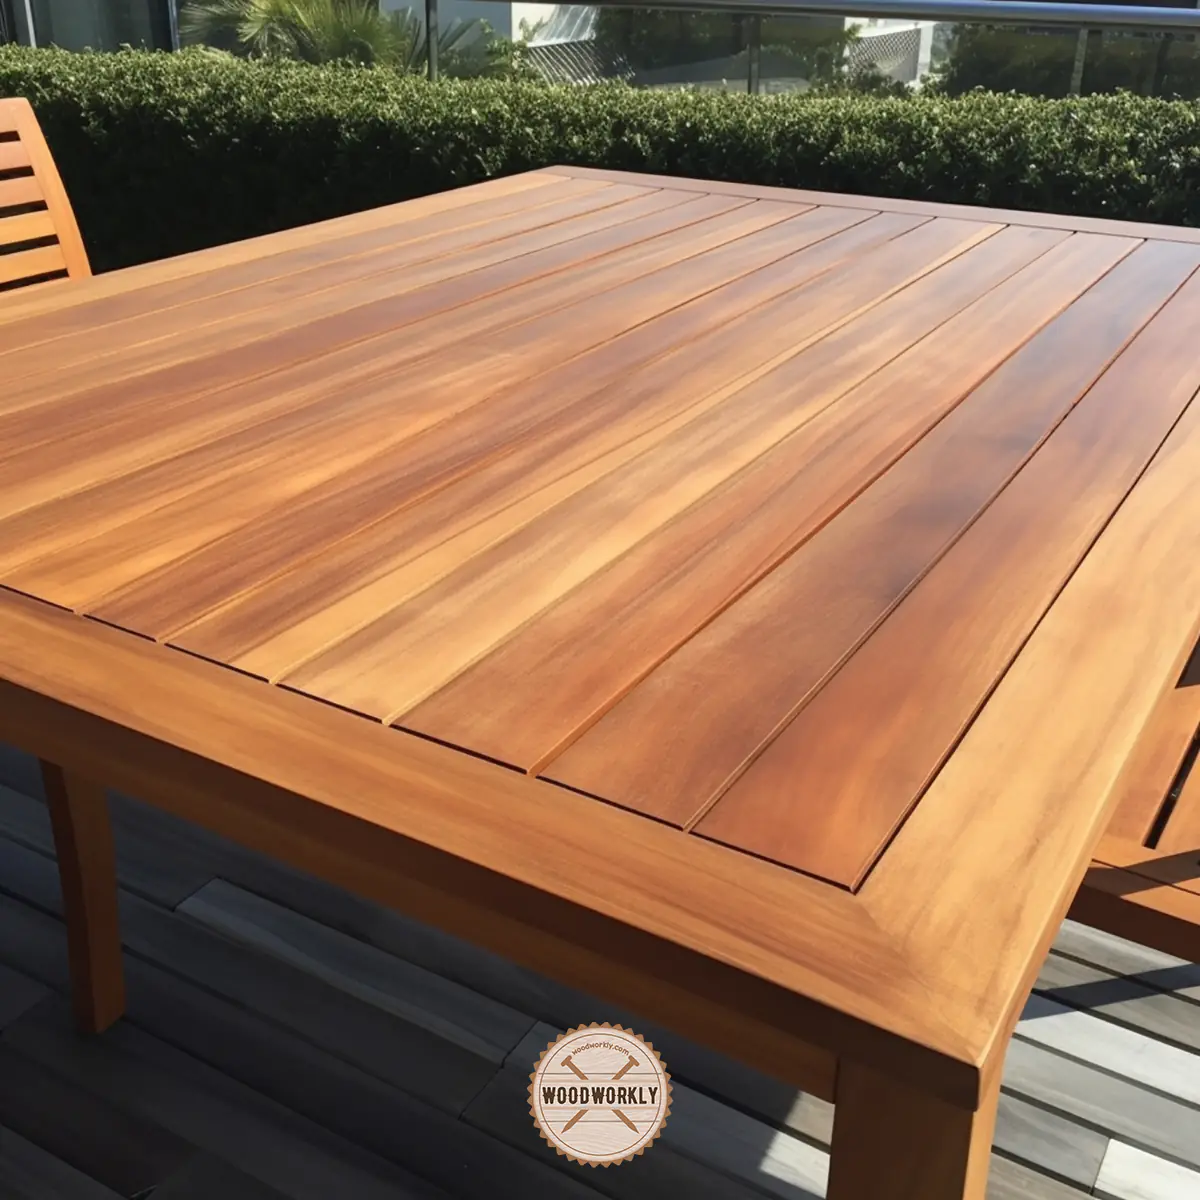 Dining table finished with teak oil